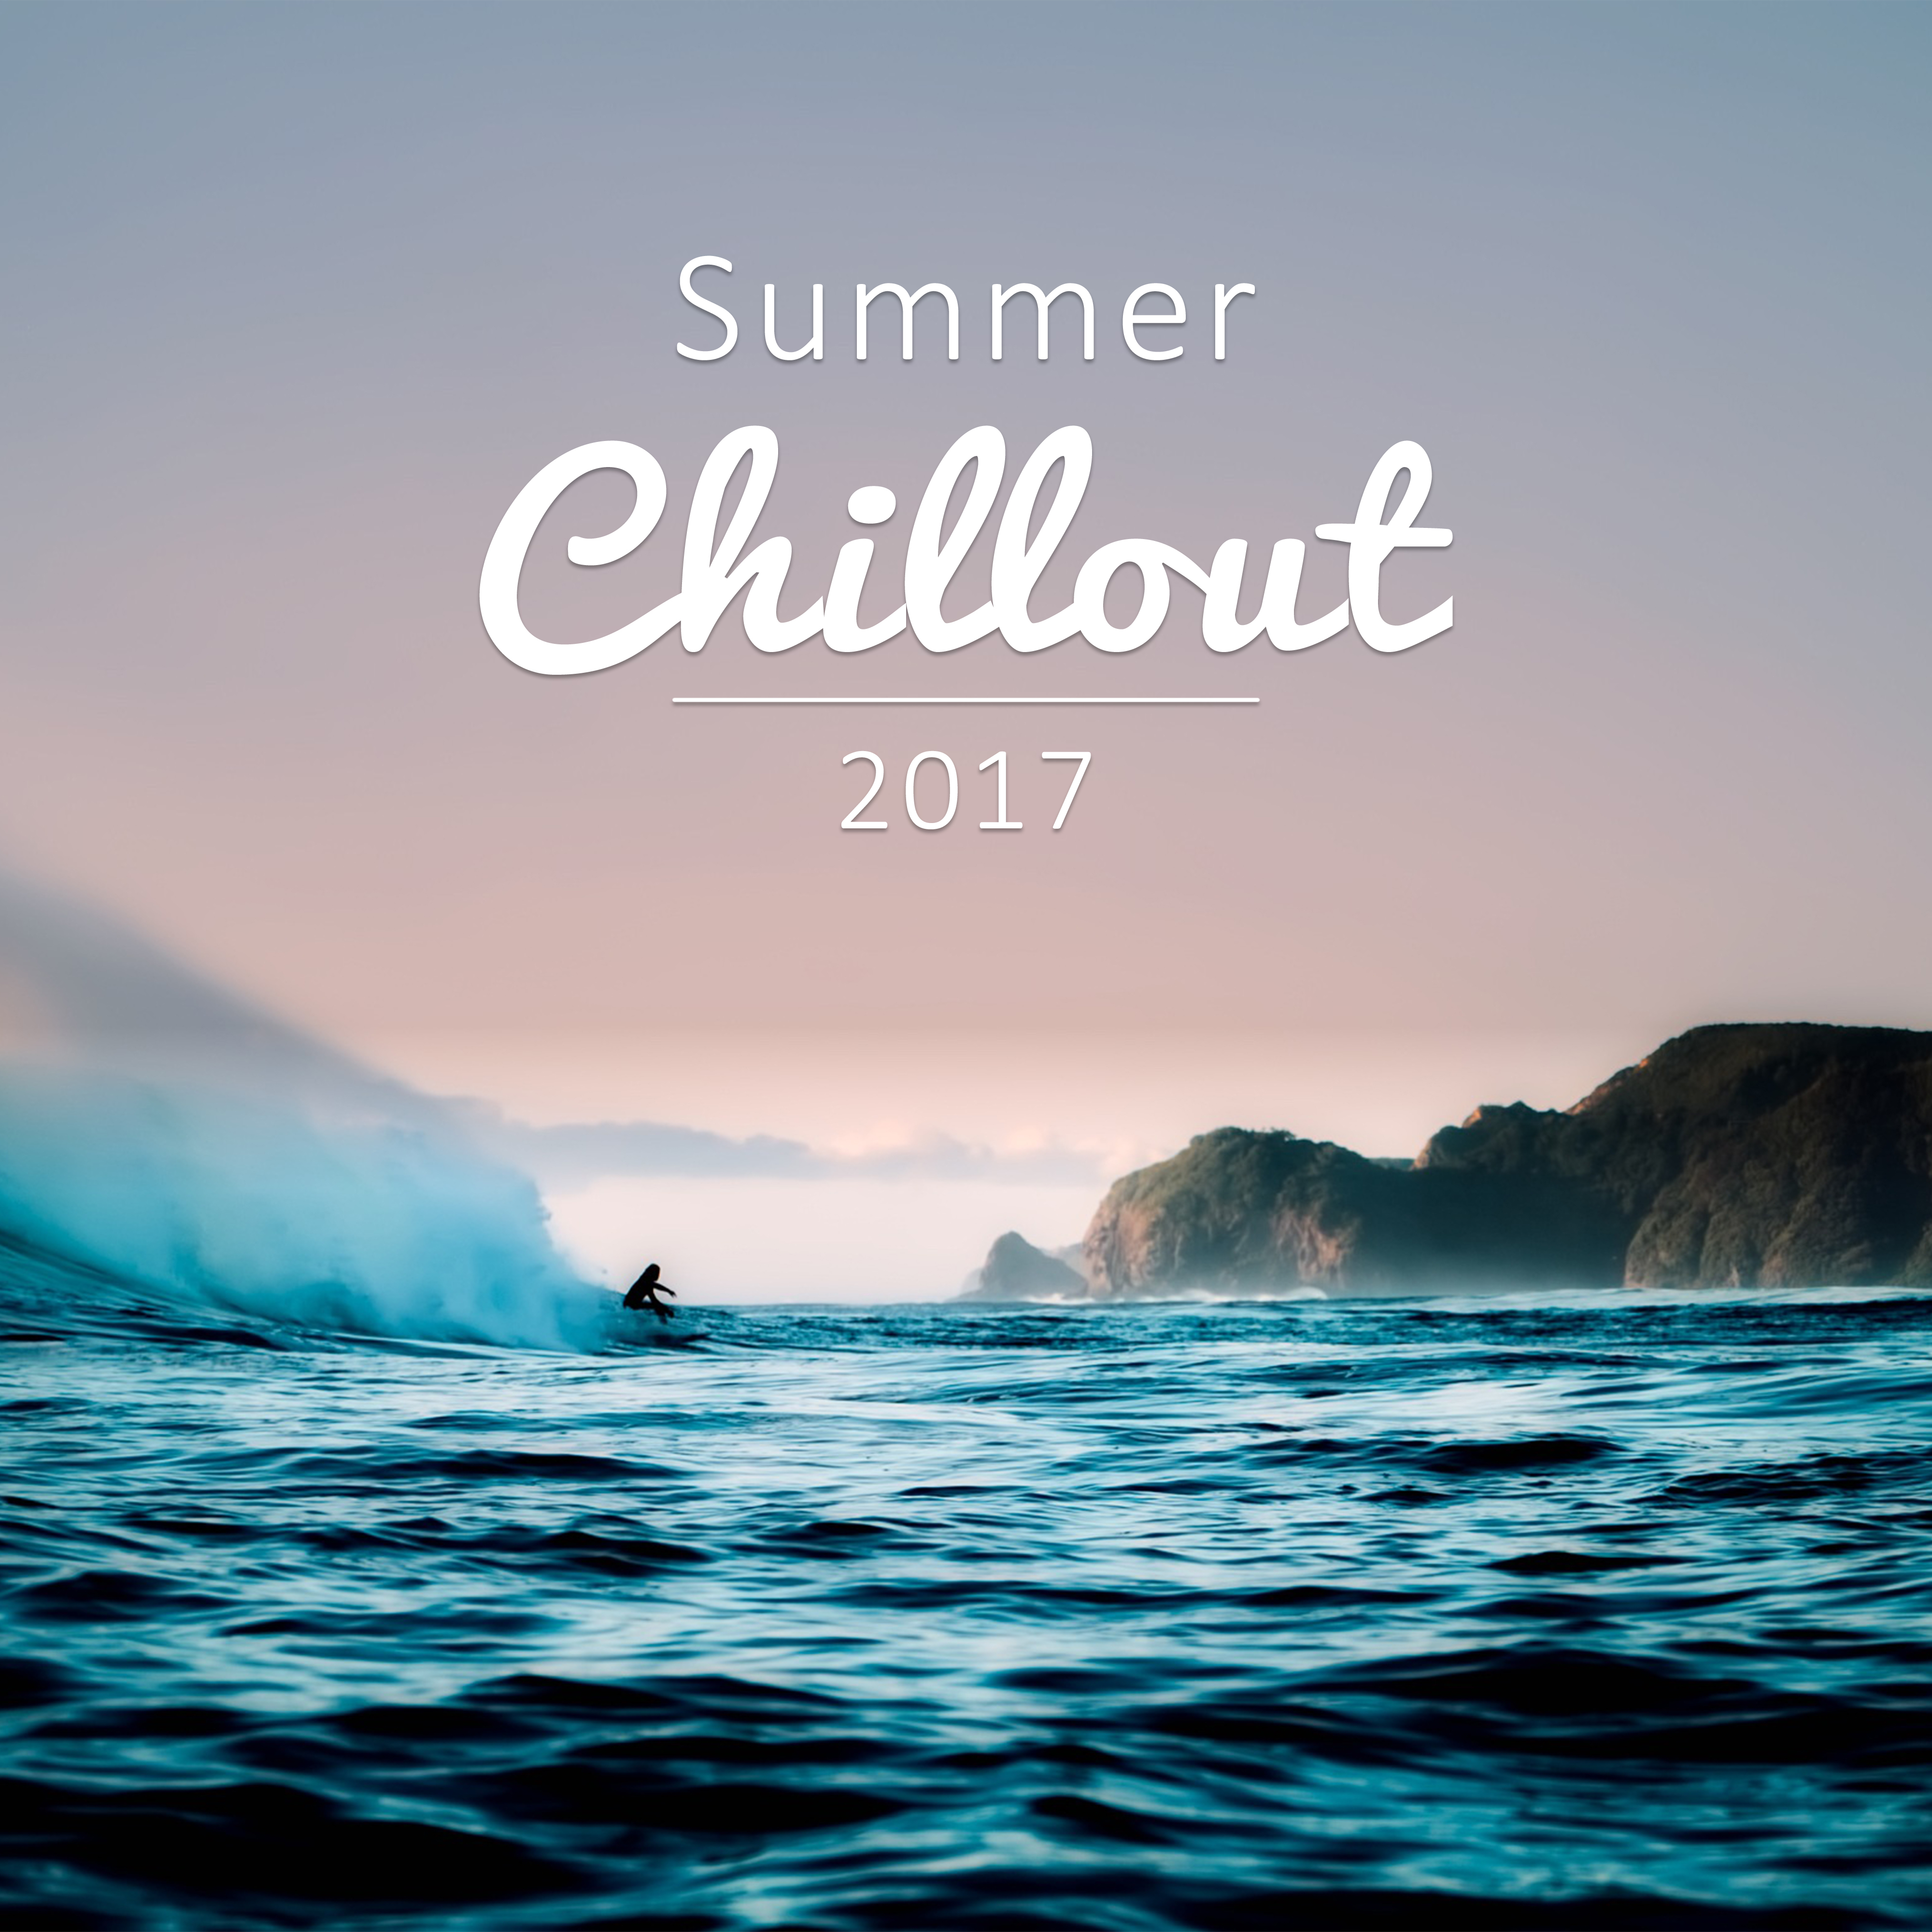 Summer Chillout 2017 – Ibiza, Holiday, Beach Music, Summer Vibes, Relaxation, New Electronic Beats